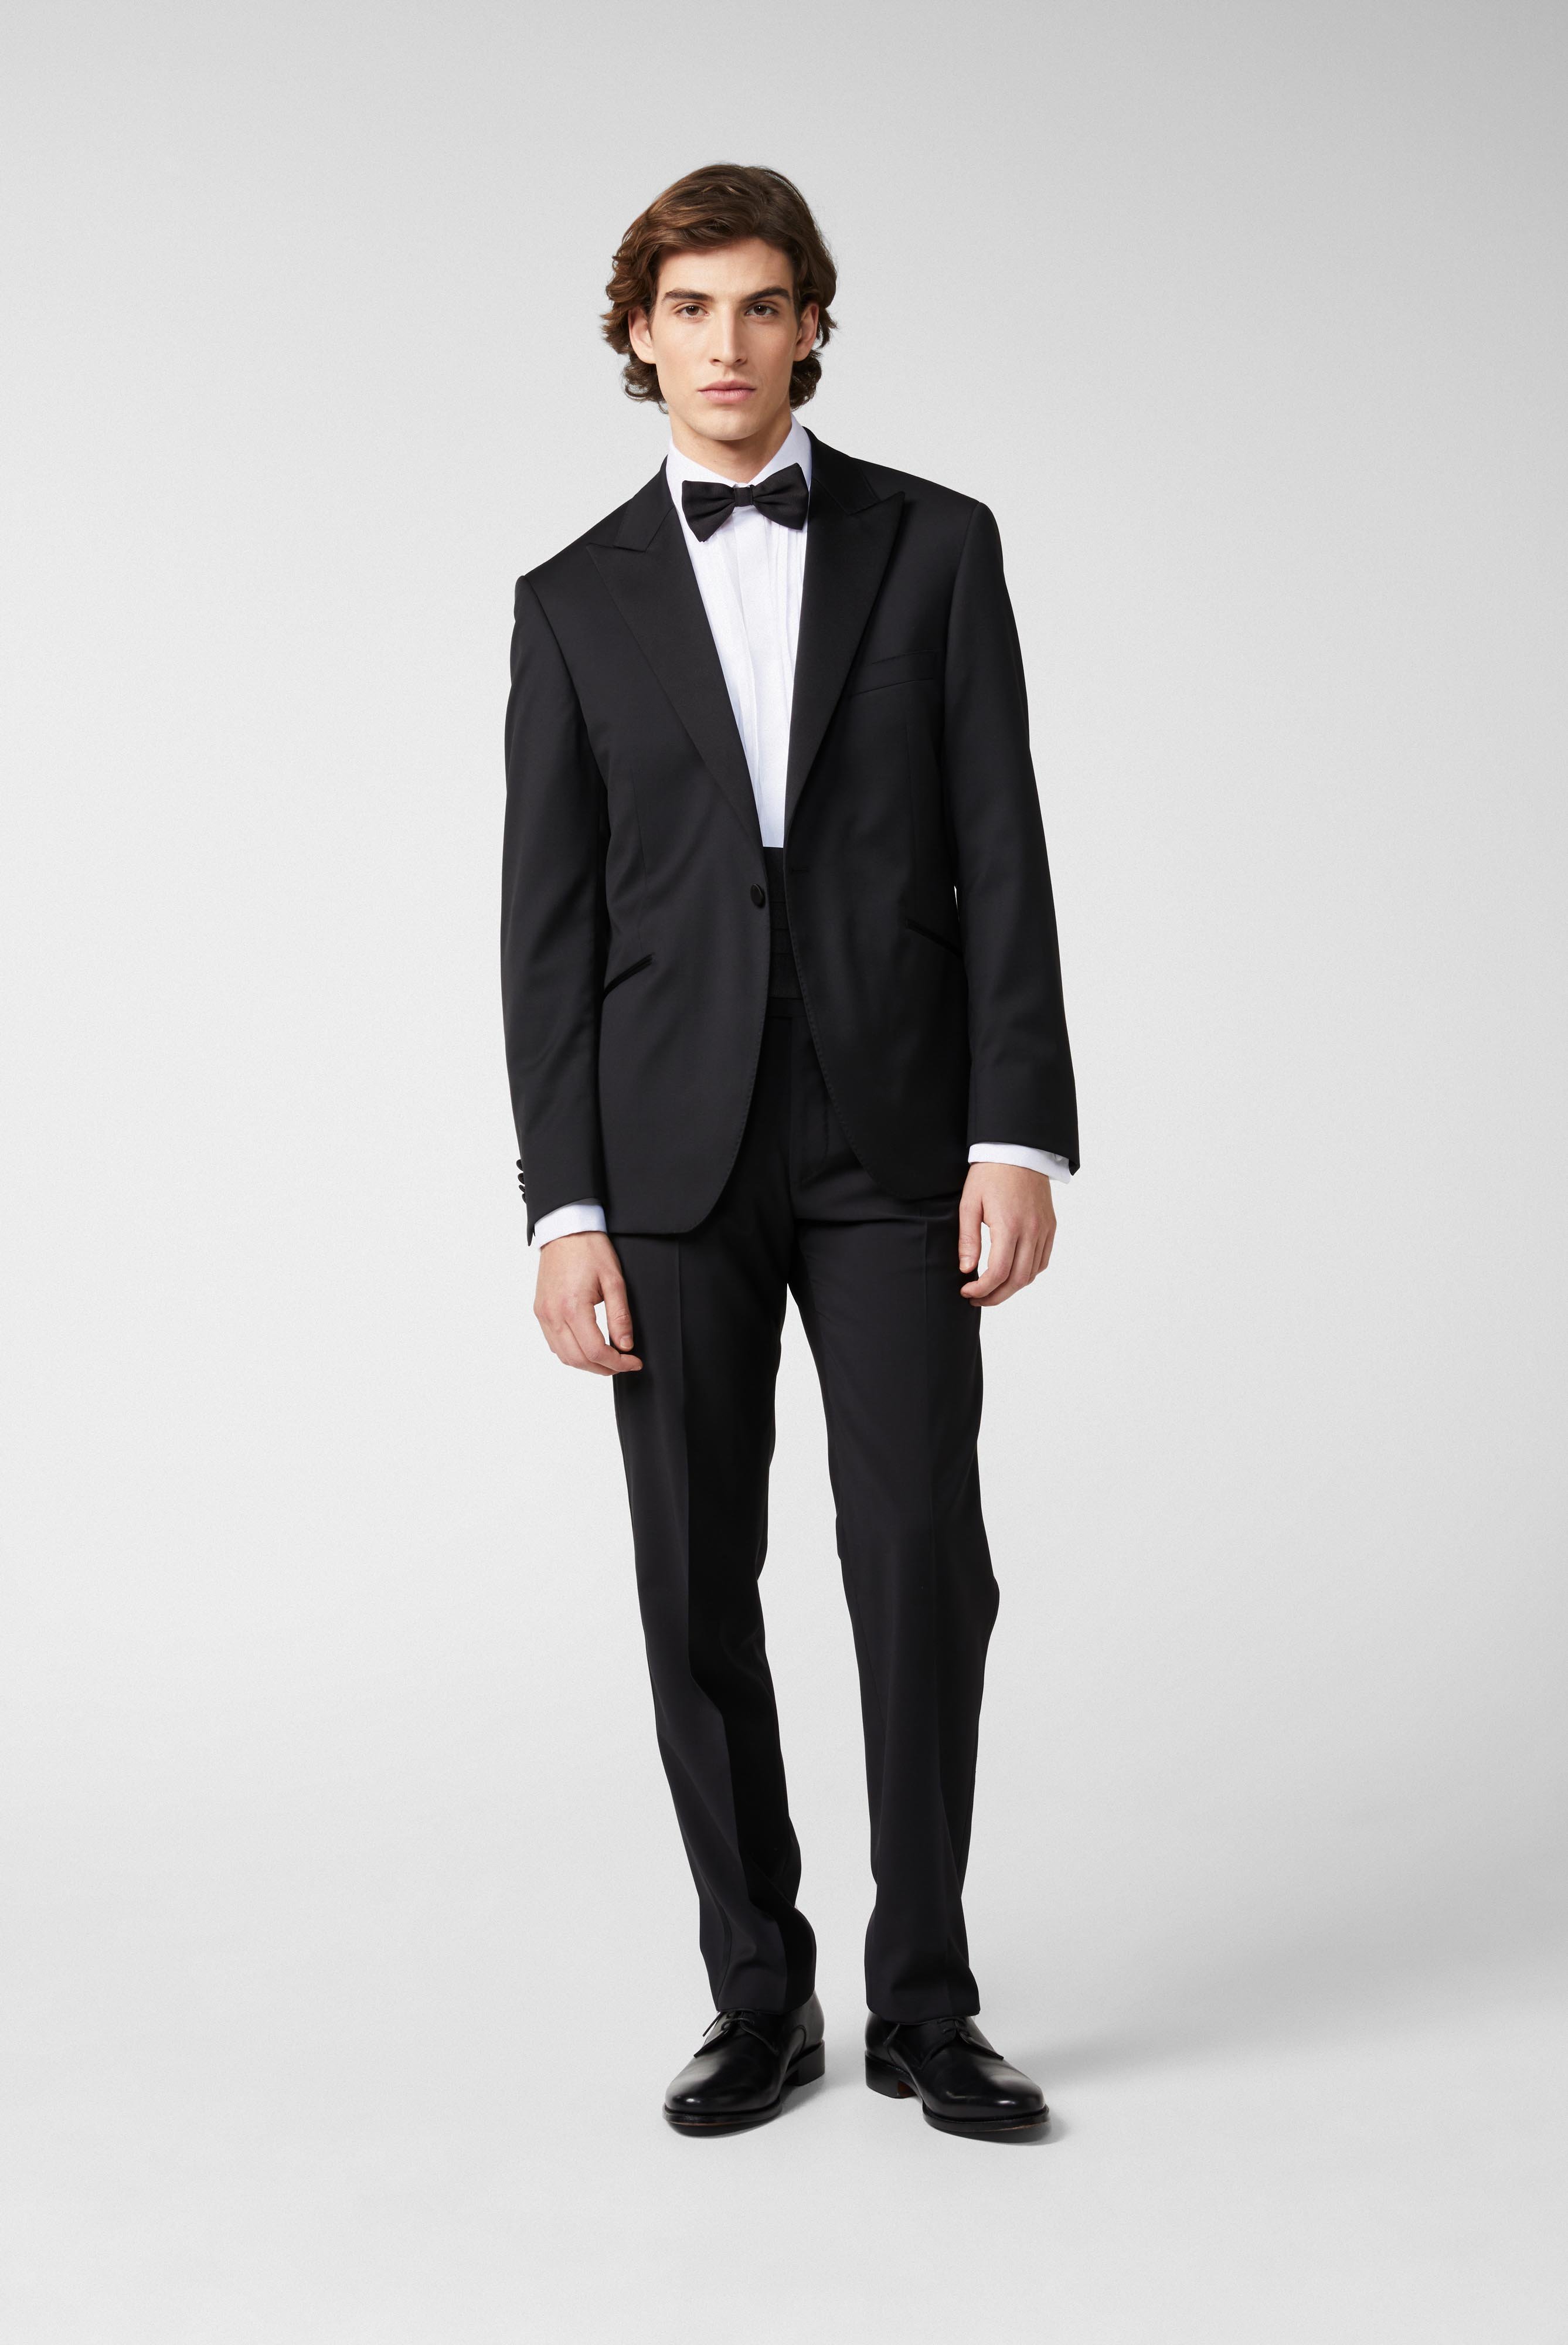 Jeans & Trousers+Tuxedo with pointed lapels+80.7992.16.H01000.099.23